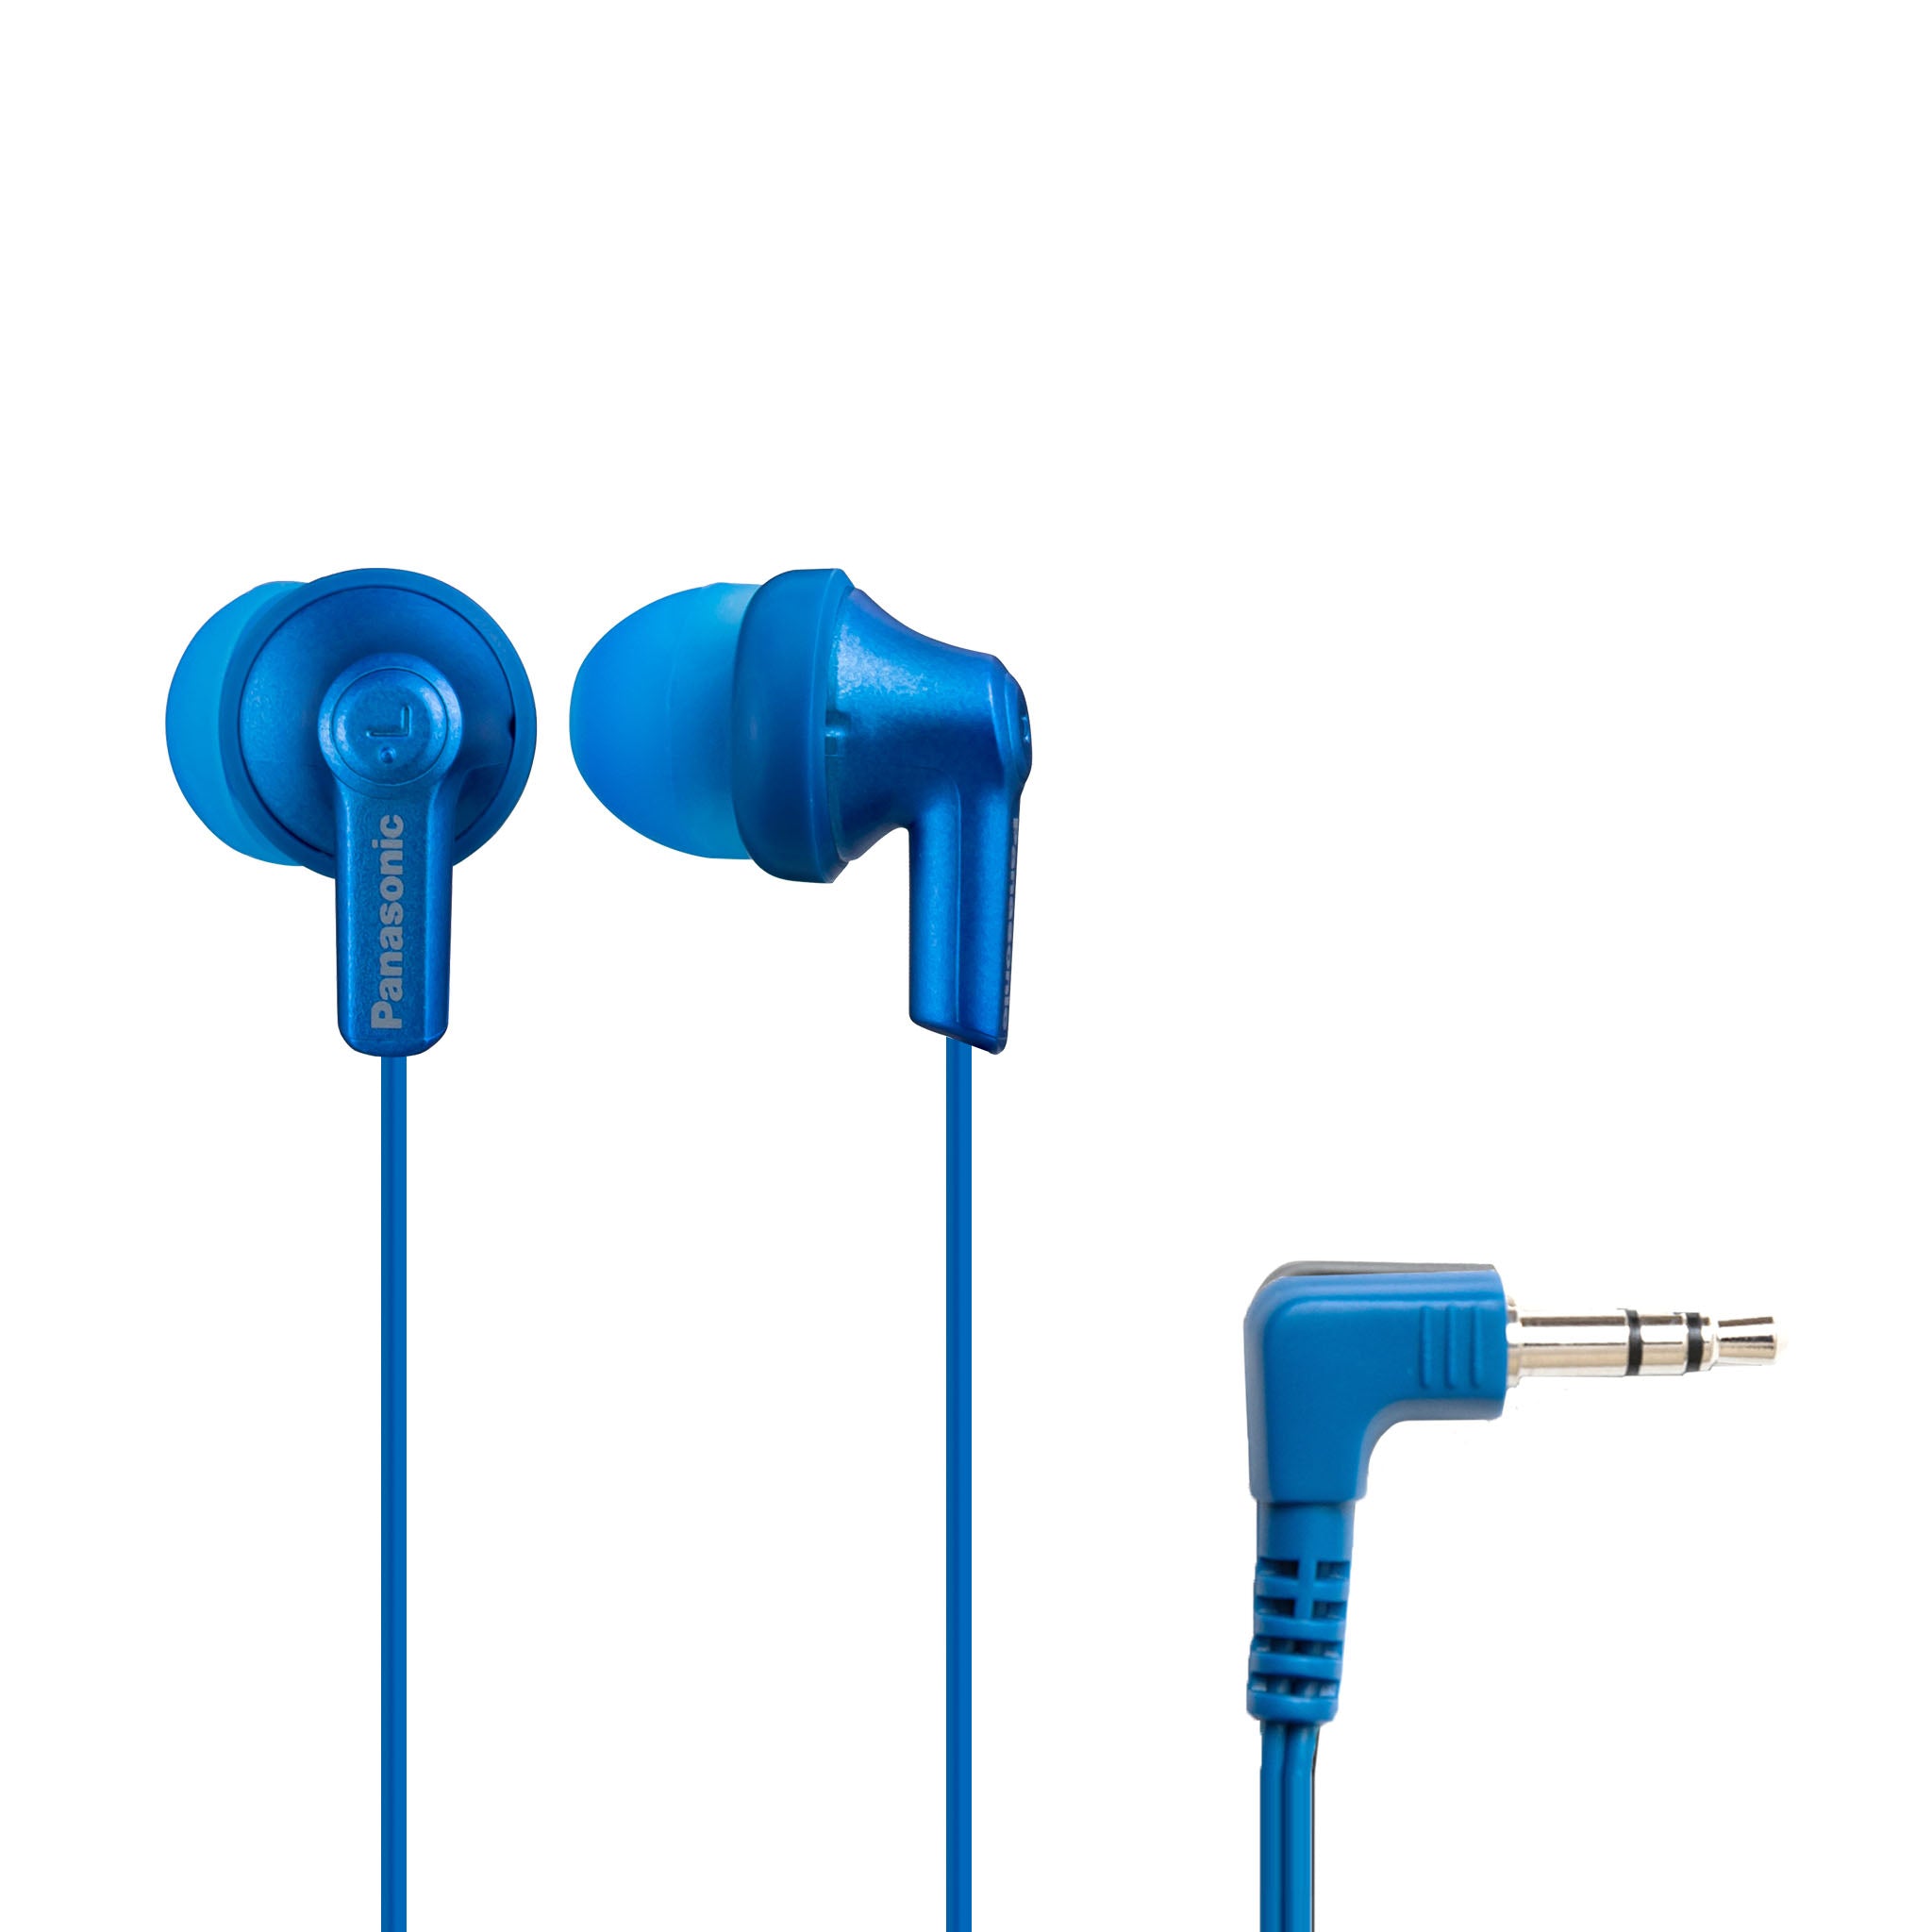 Headphones Jack Laptops Earbud Phones with for Panasonic ErgoFit RP-HJE120 3.5mm - In-Ear and